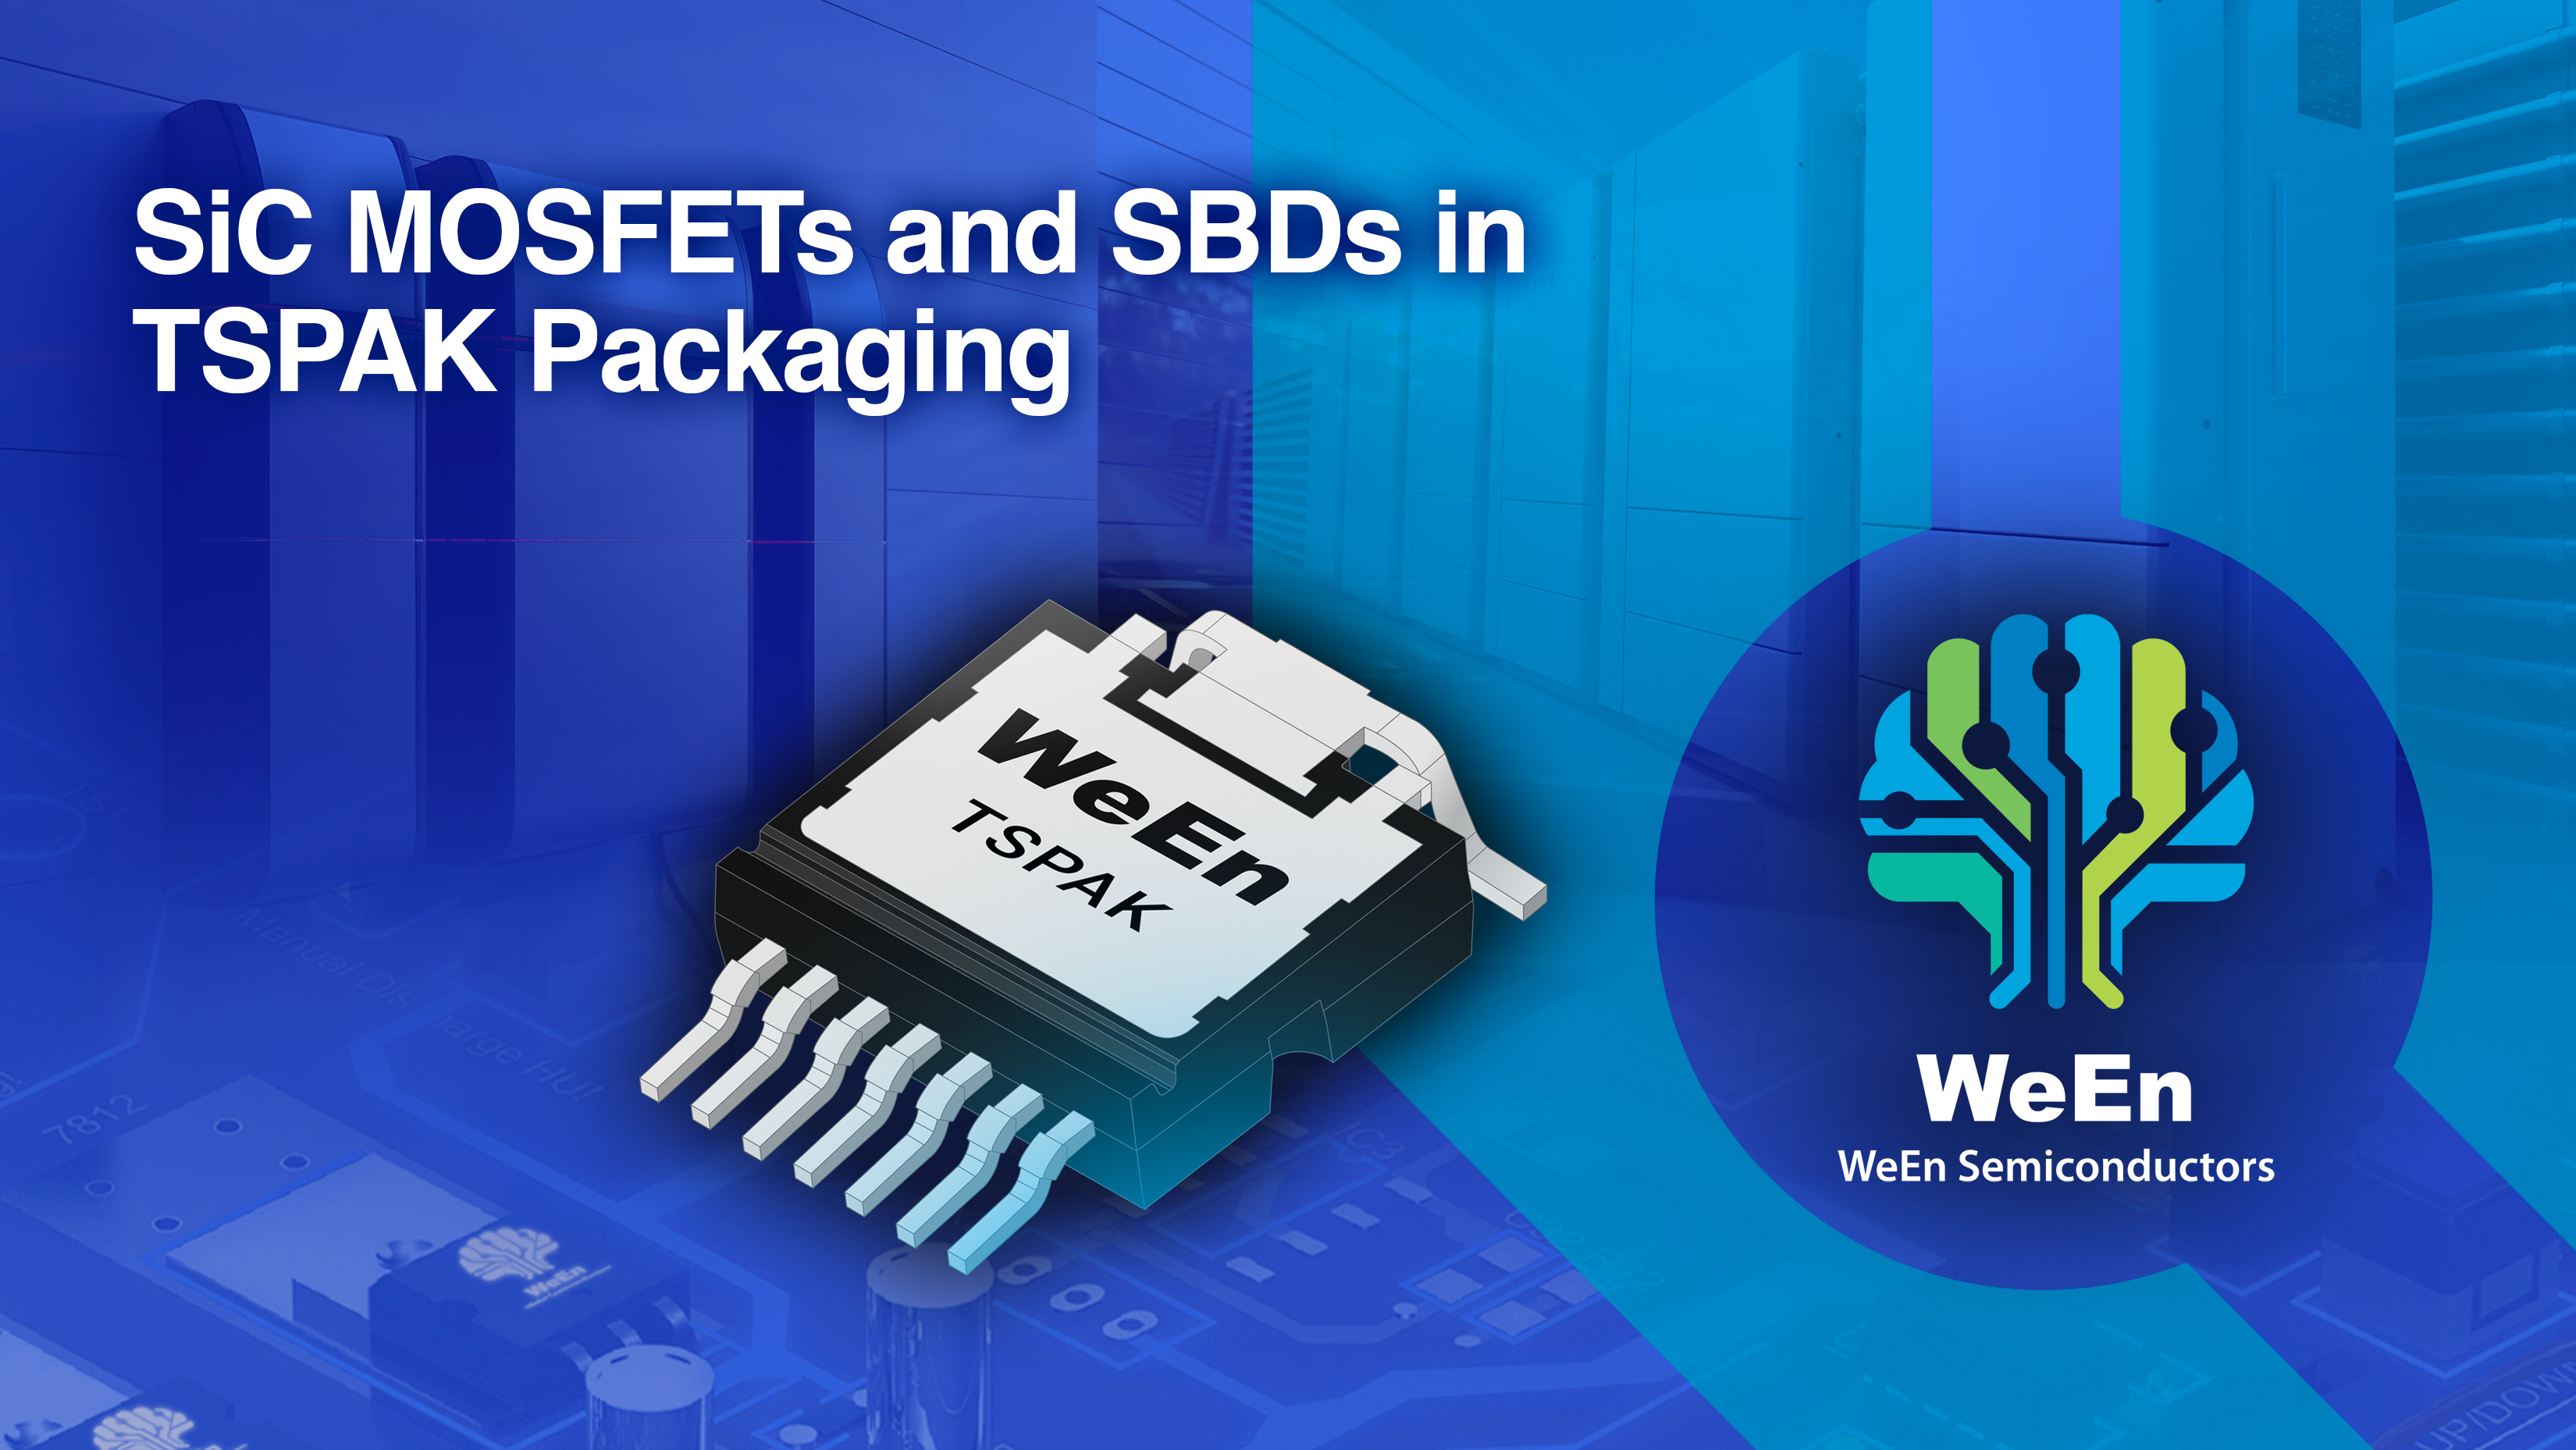 WeEn Semiconductors Extends Range of Advanced SiC Technologies with TSPAK Packaging